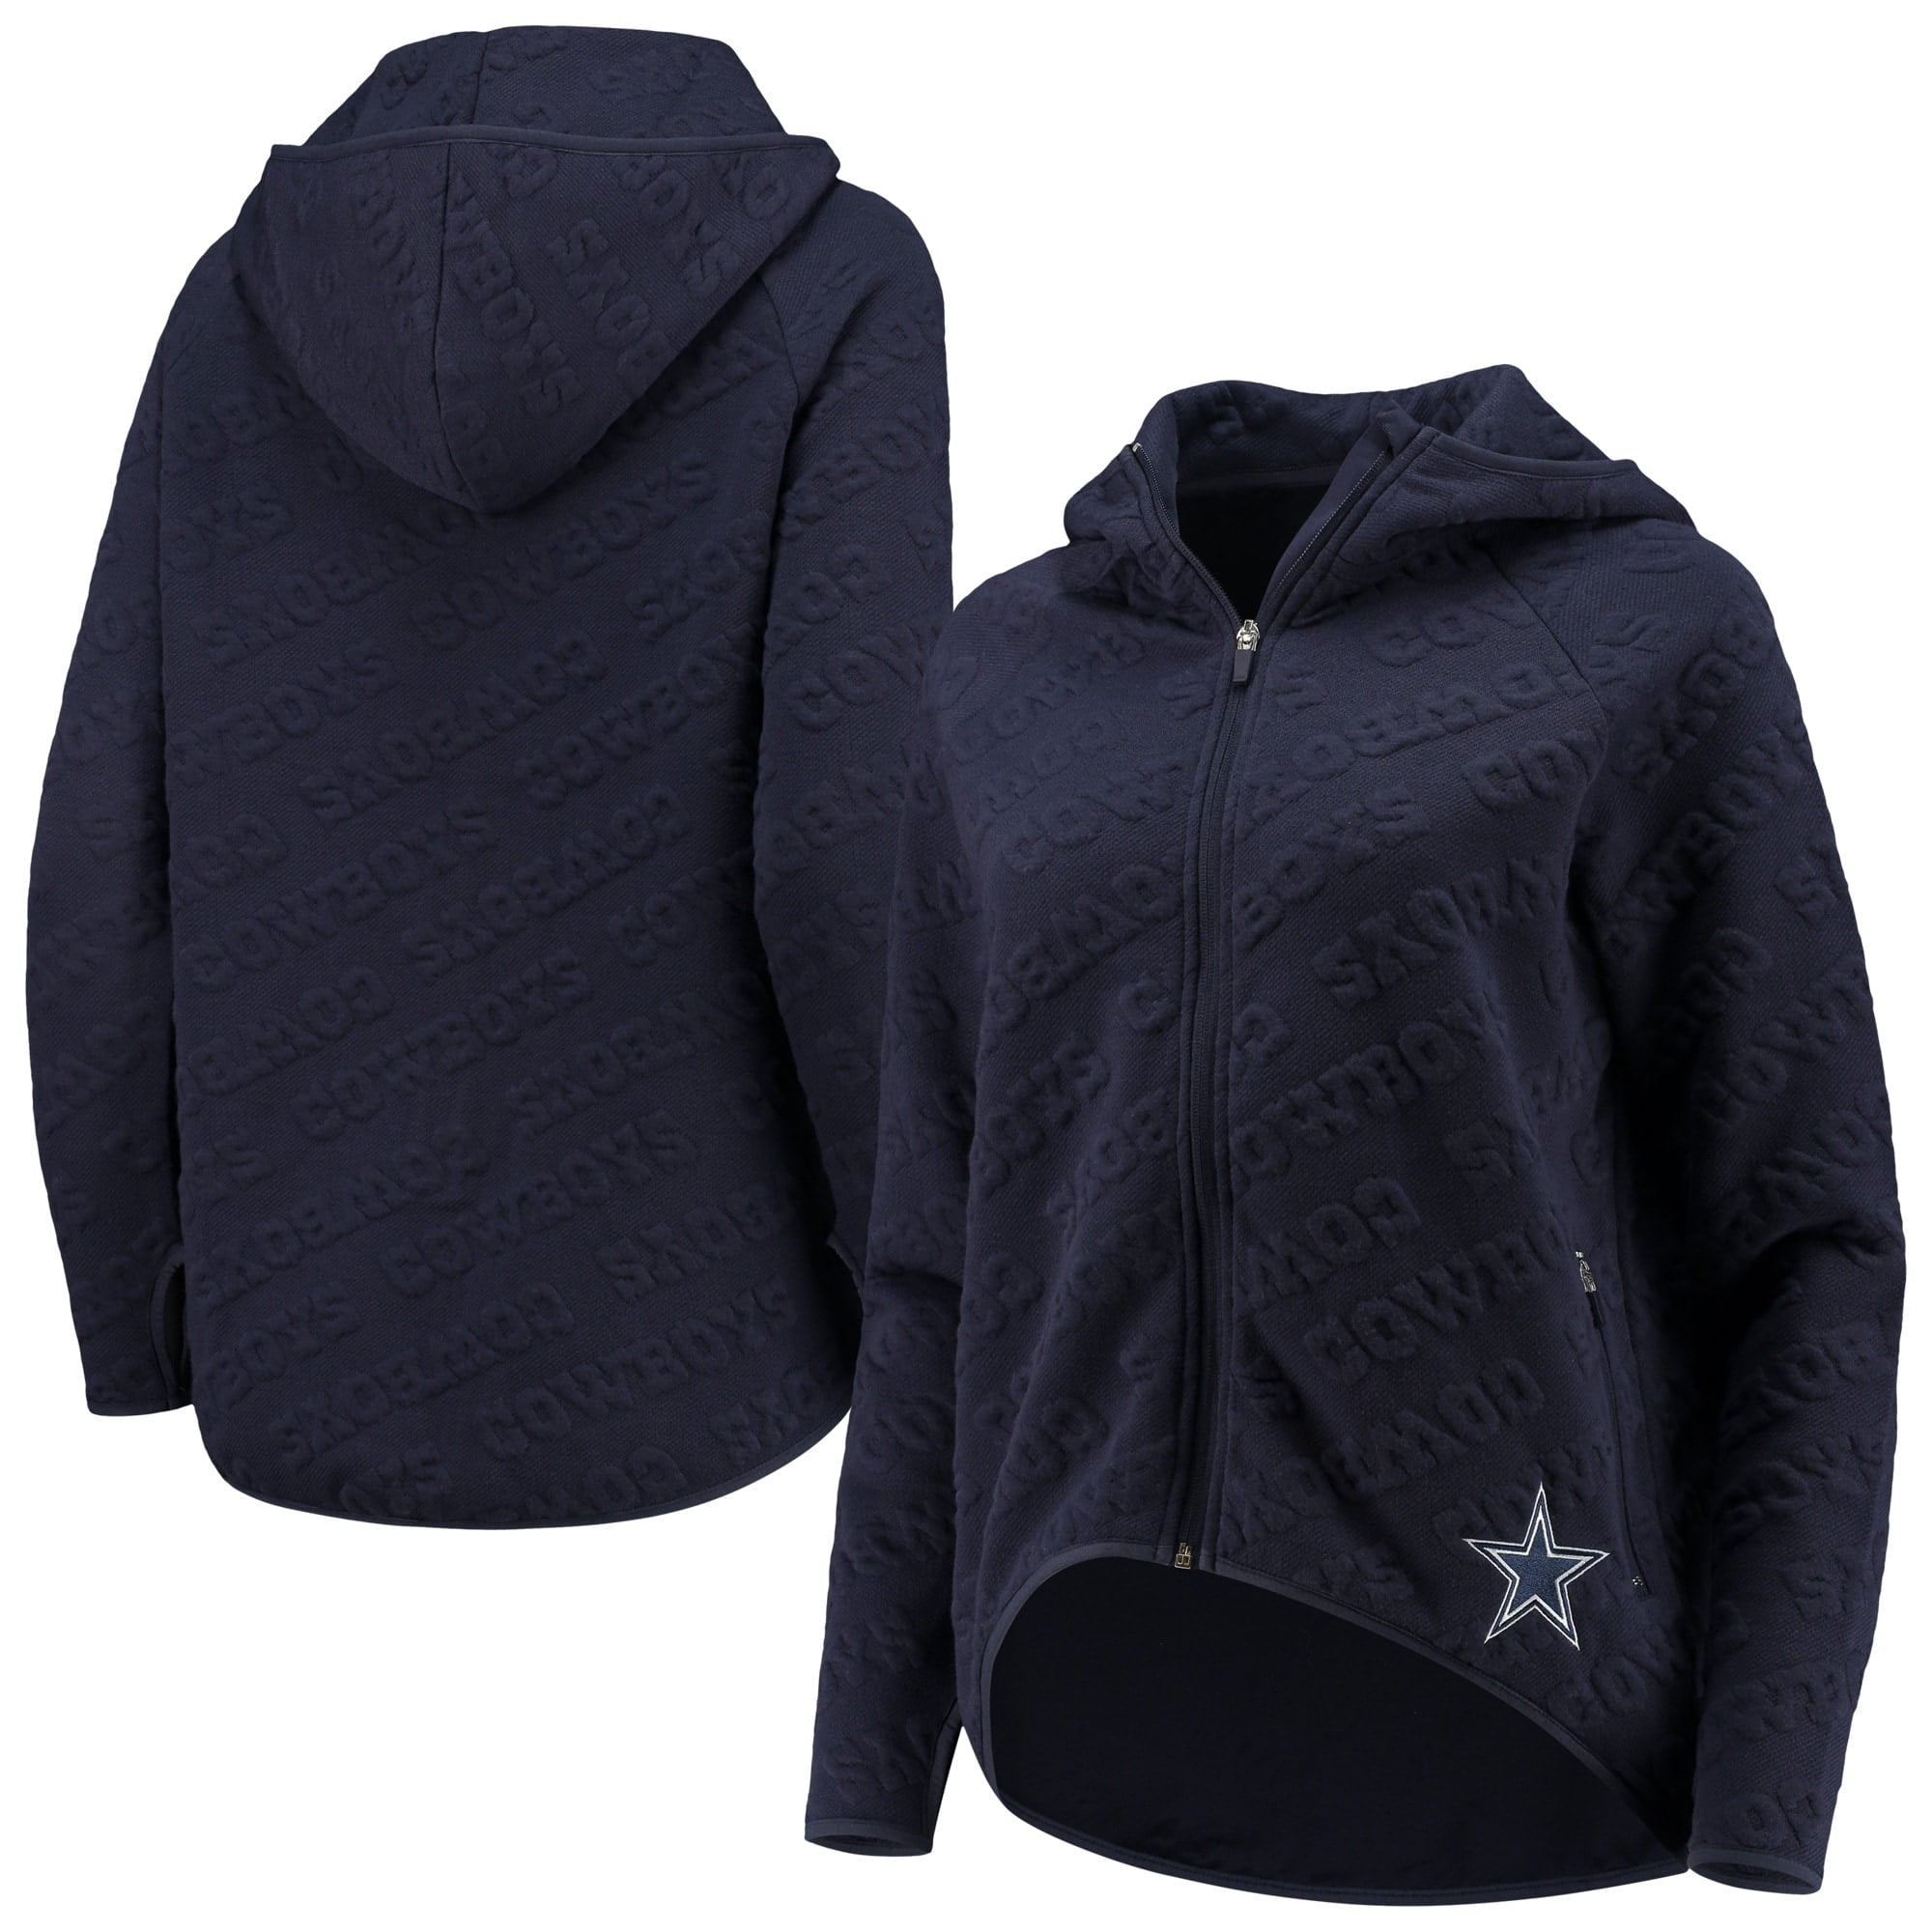 Nordstrom Women Clothing Jackets Ponchos & Capes Womens Navy Dallas Cowboys Akaine Tech Cape Raglan Hoodie Full-Zip Jacket at Nordstrom 